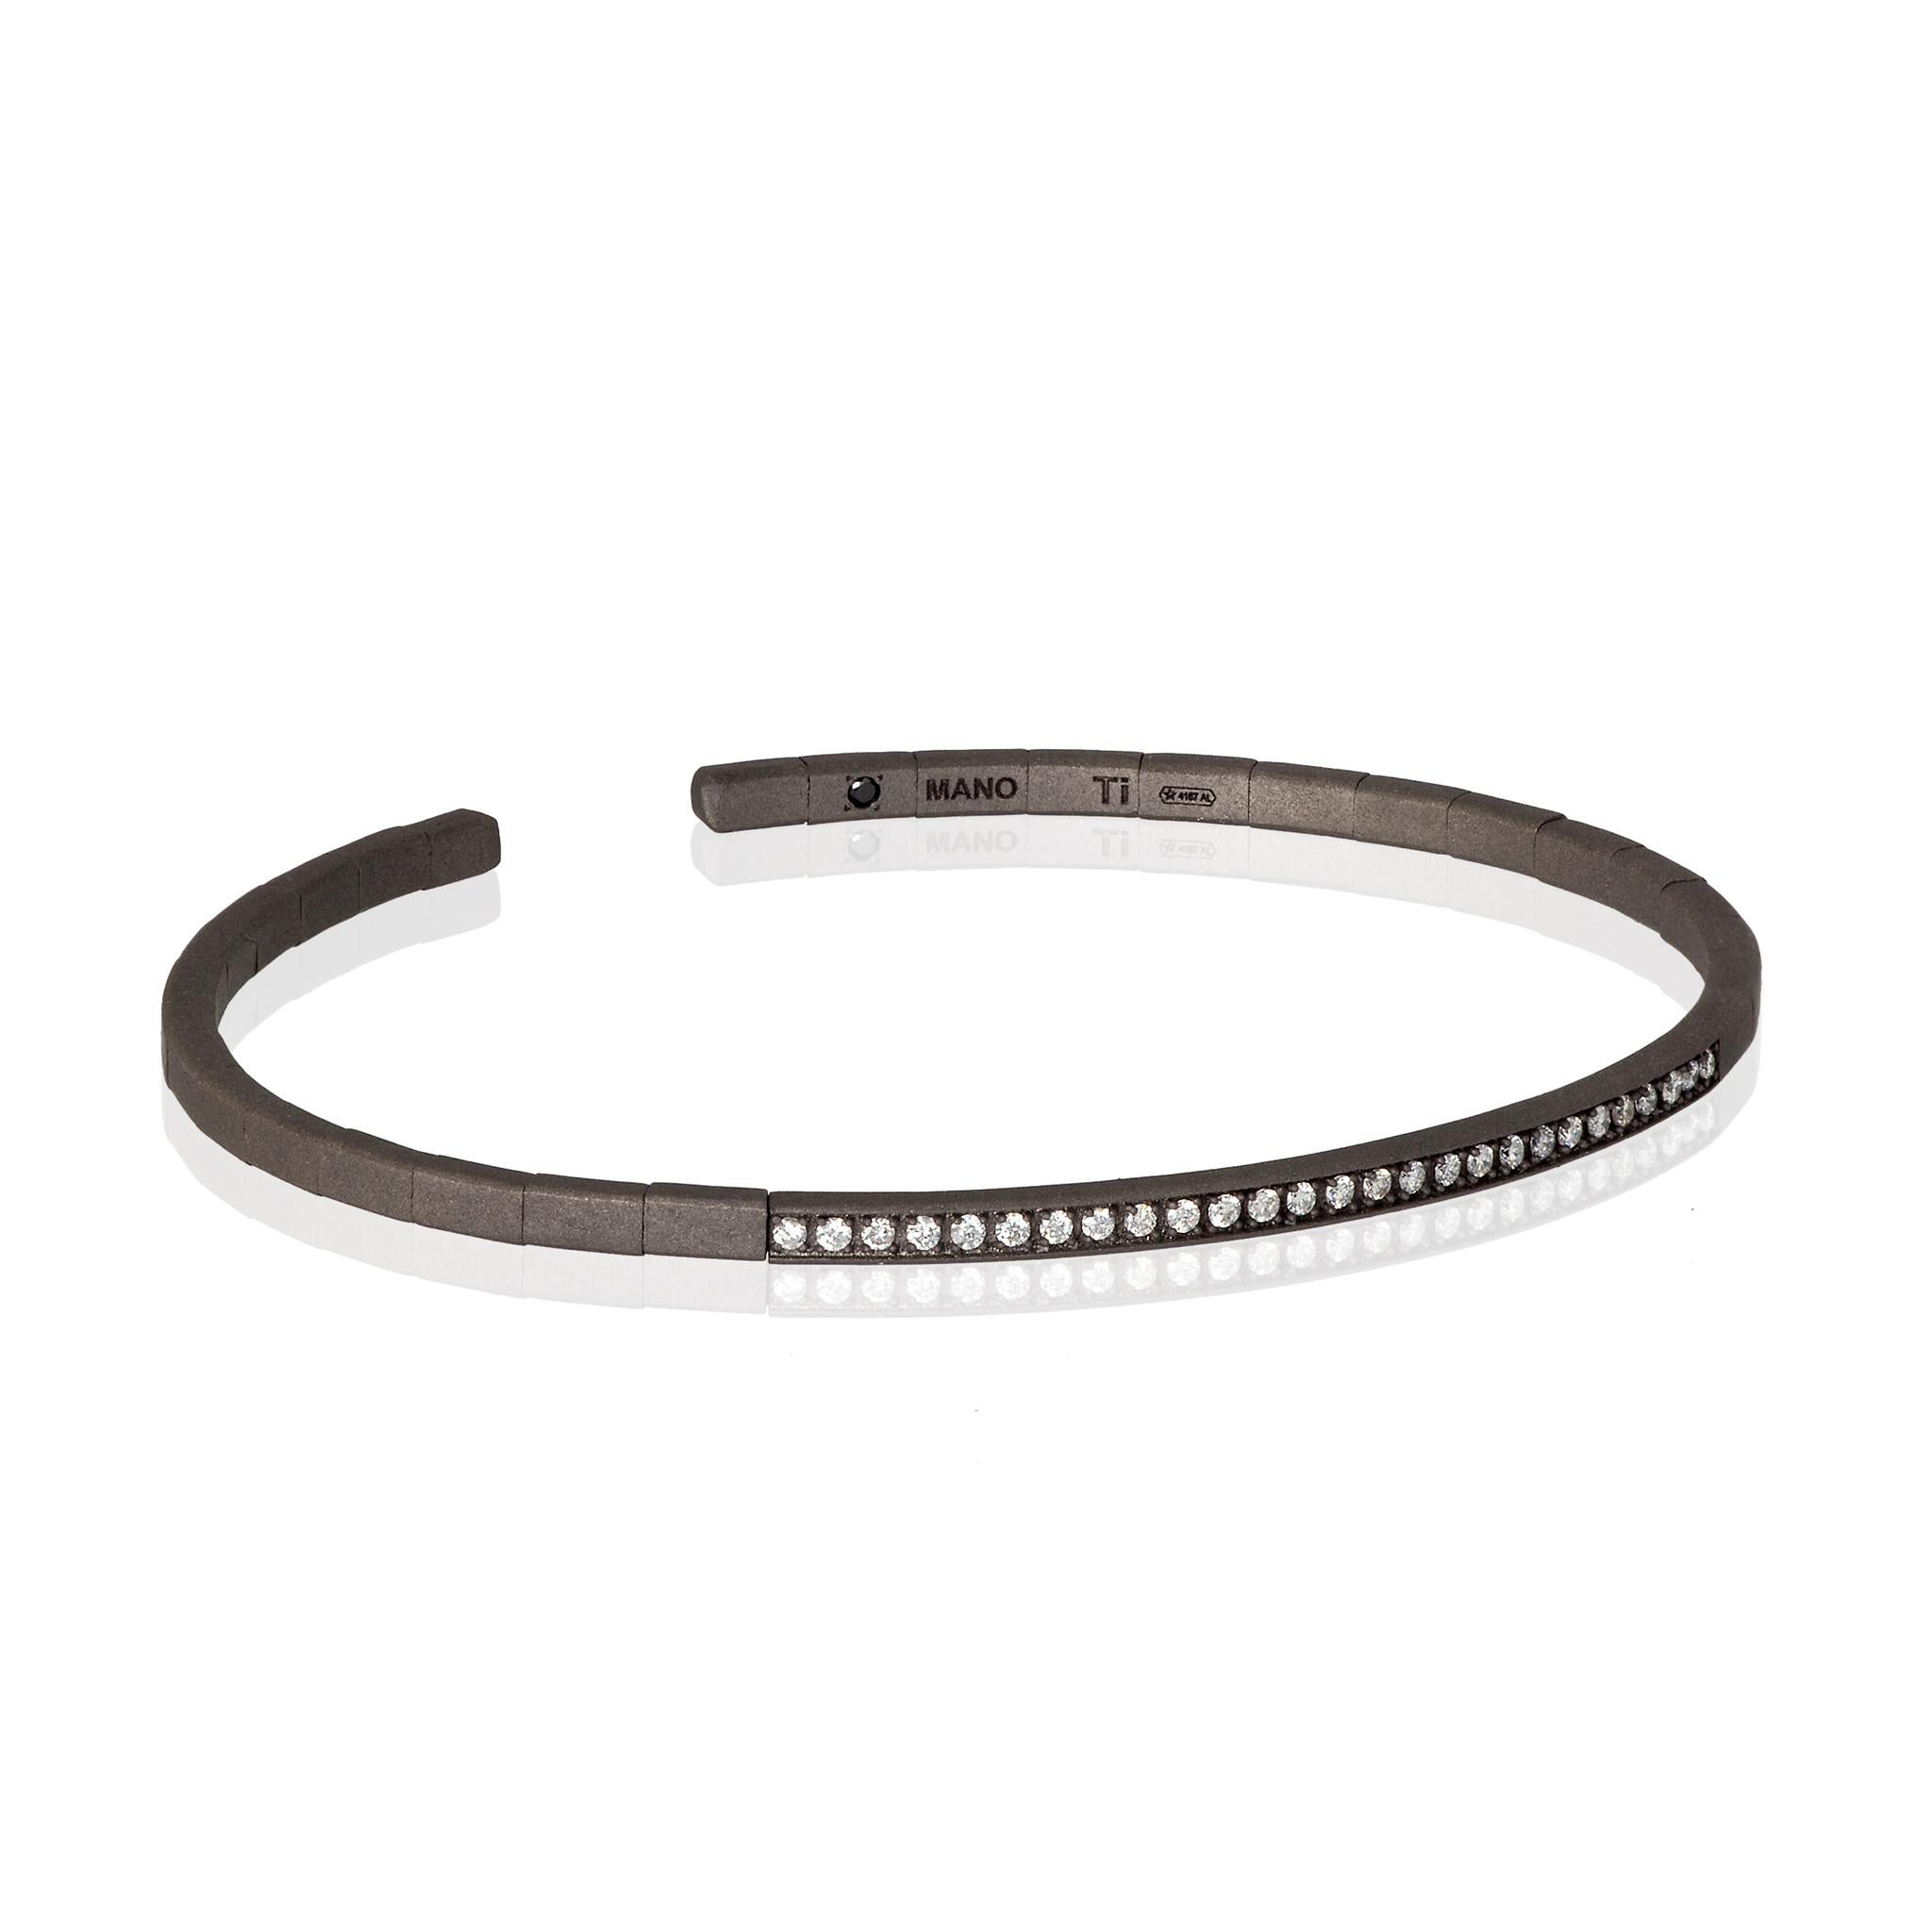 Men's titanium bracelet with white diamonds. A bracelet with an elastic structure featuring a long series of 27 white diamonds with a total carat of 27 points running through part of the bracelet. On the inside, a 1-point black diamond has been set